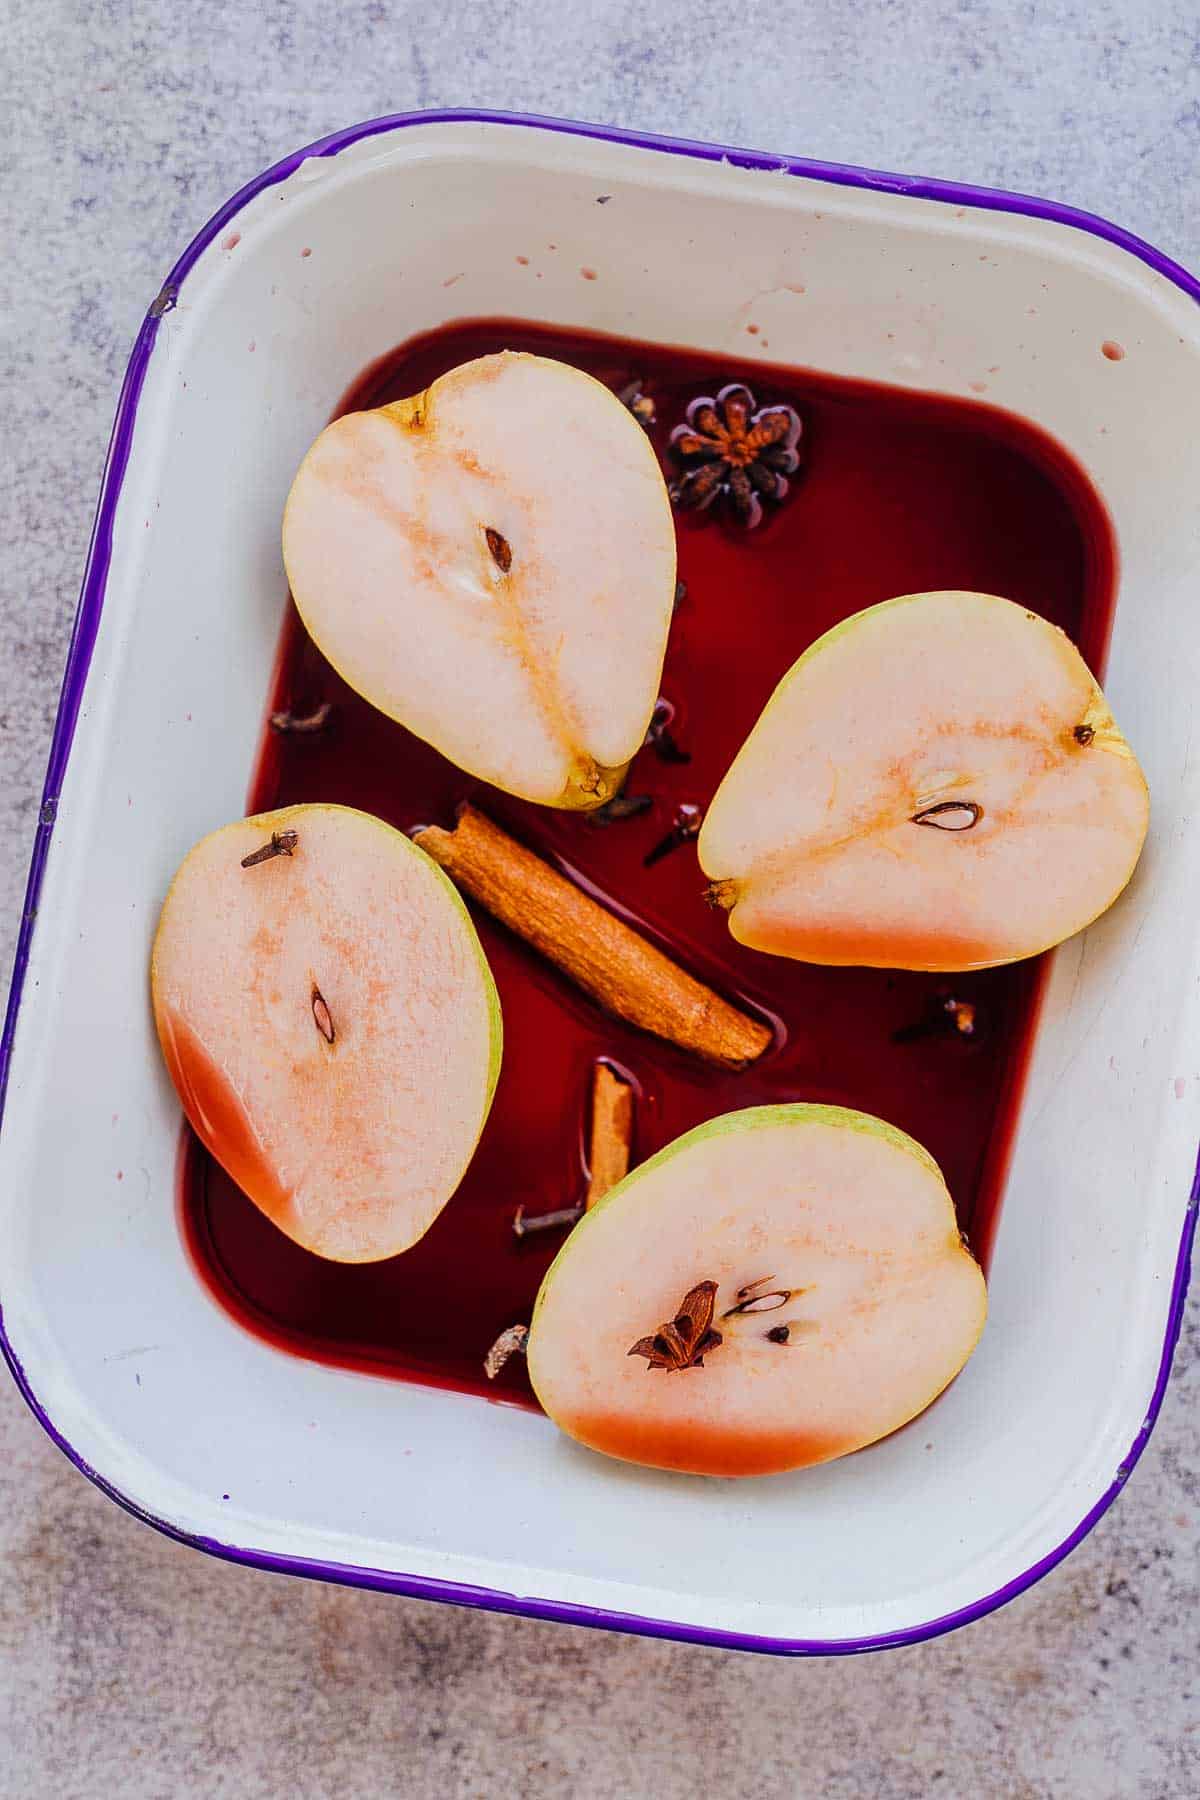 Poached pears in wine - an example of cooking with wine